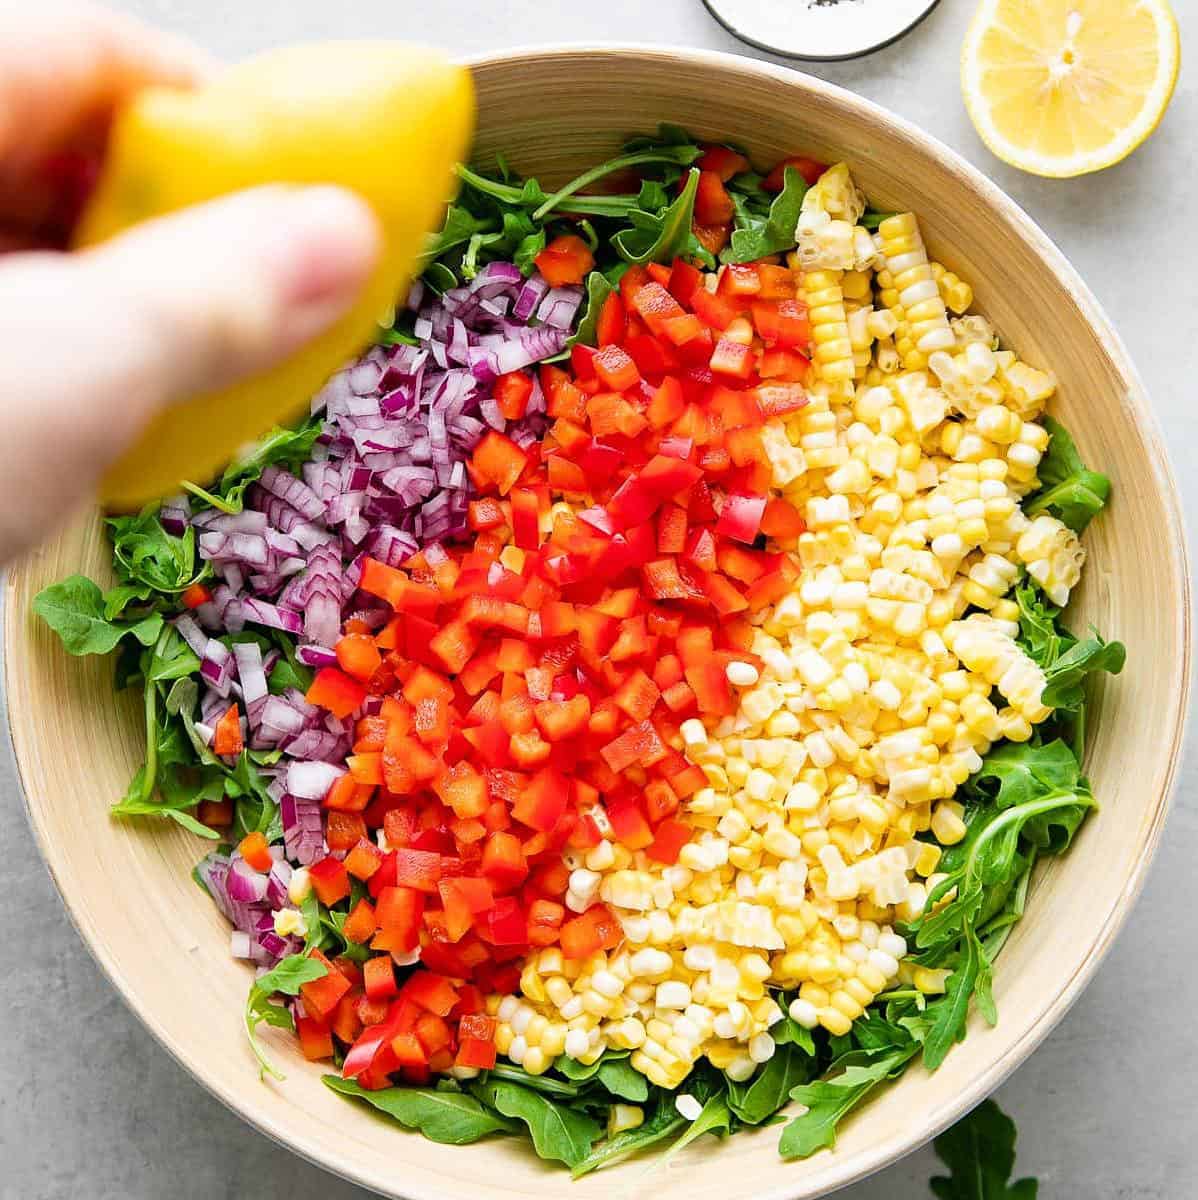  When it comes to salads, it doesn't get much more colorful than this one!